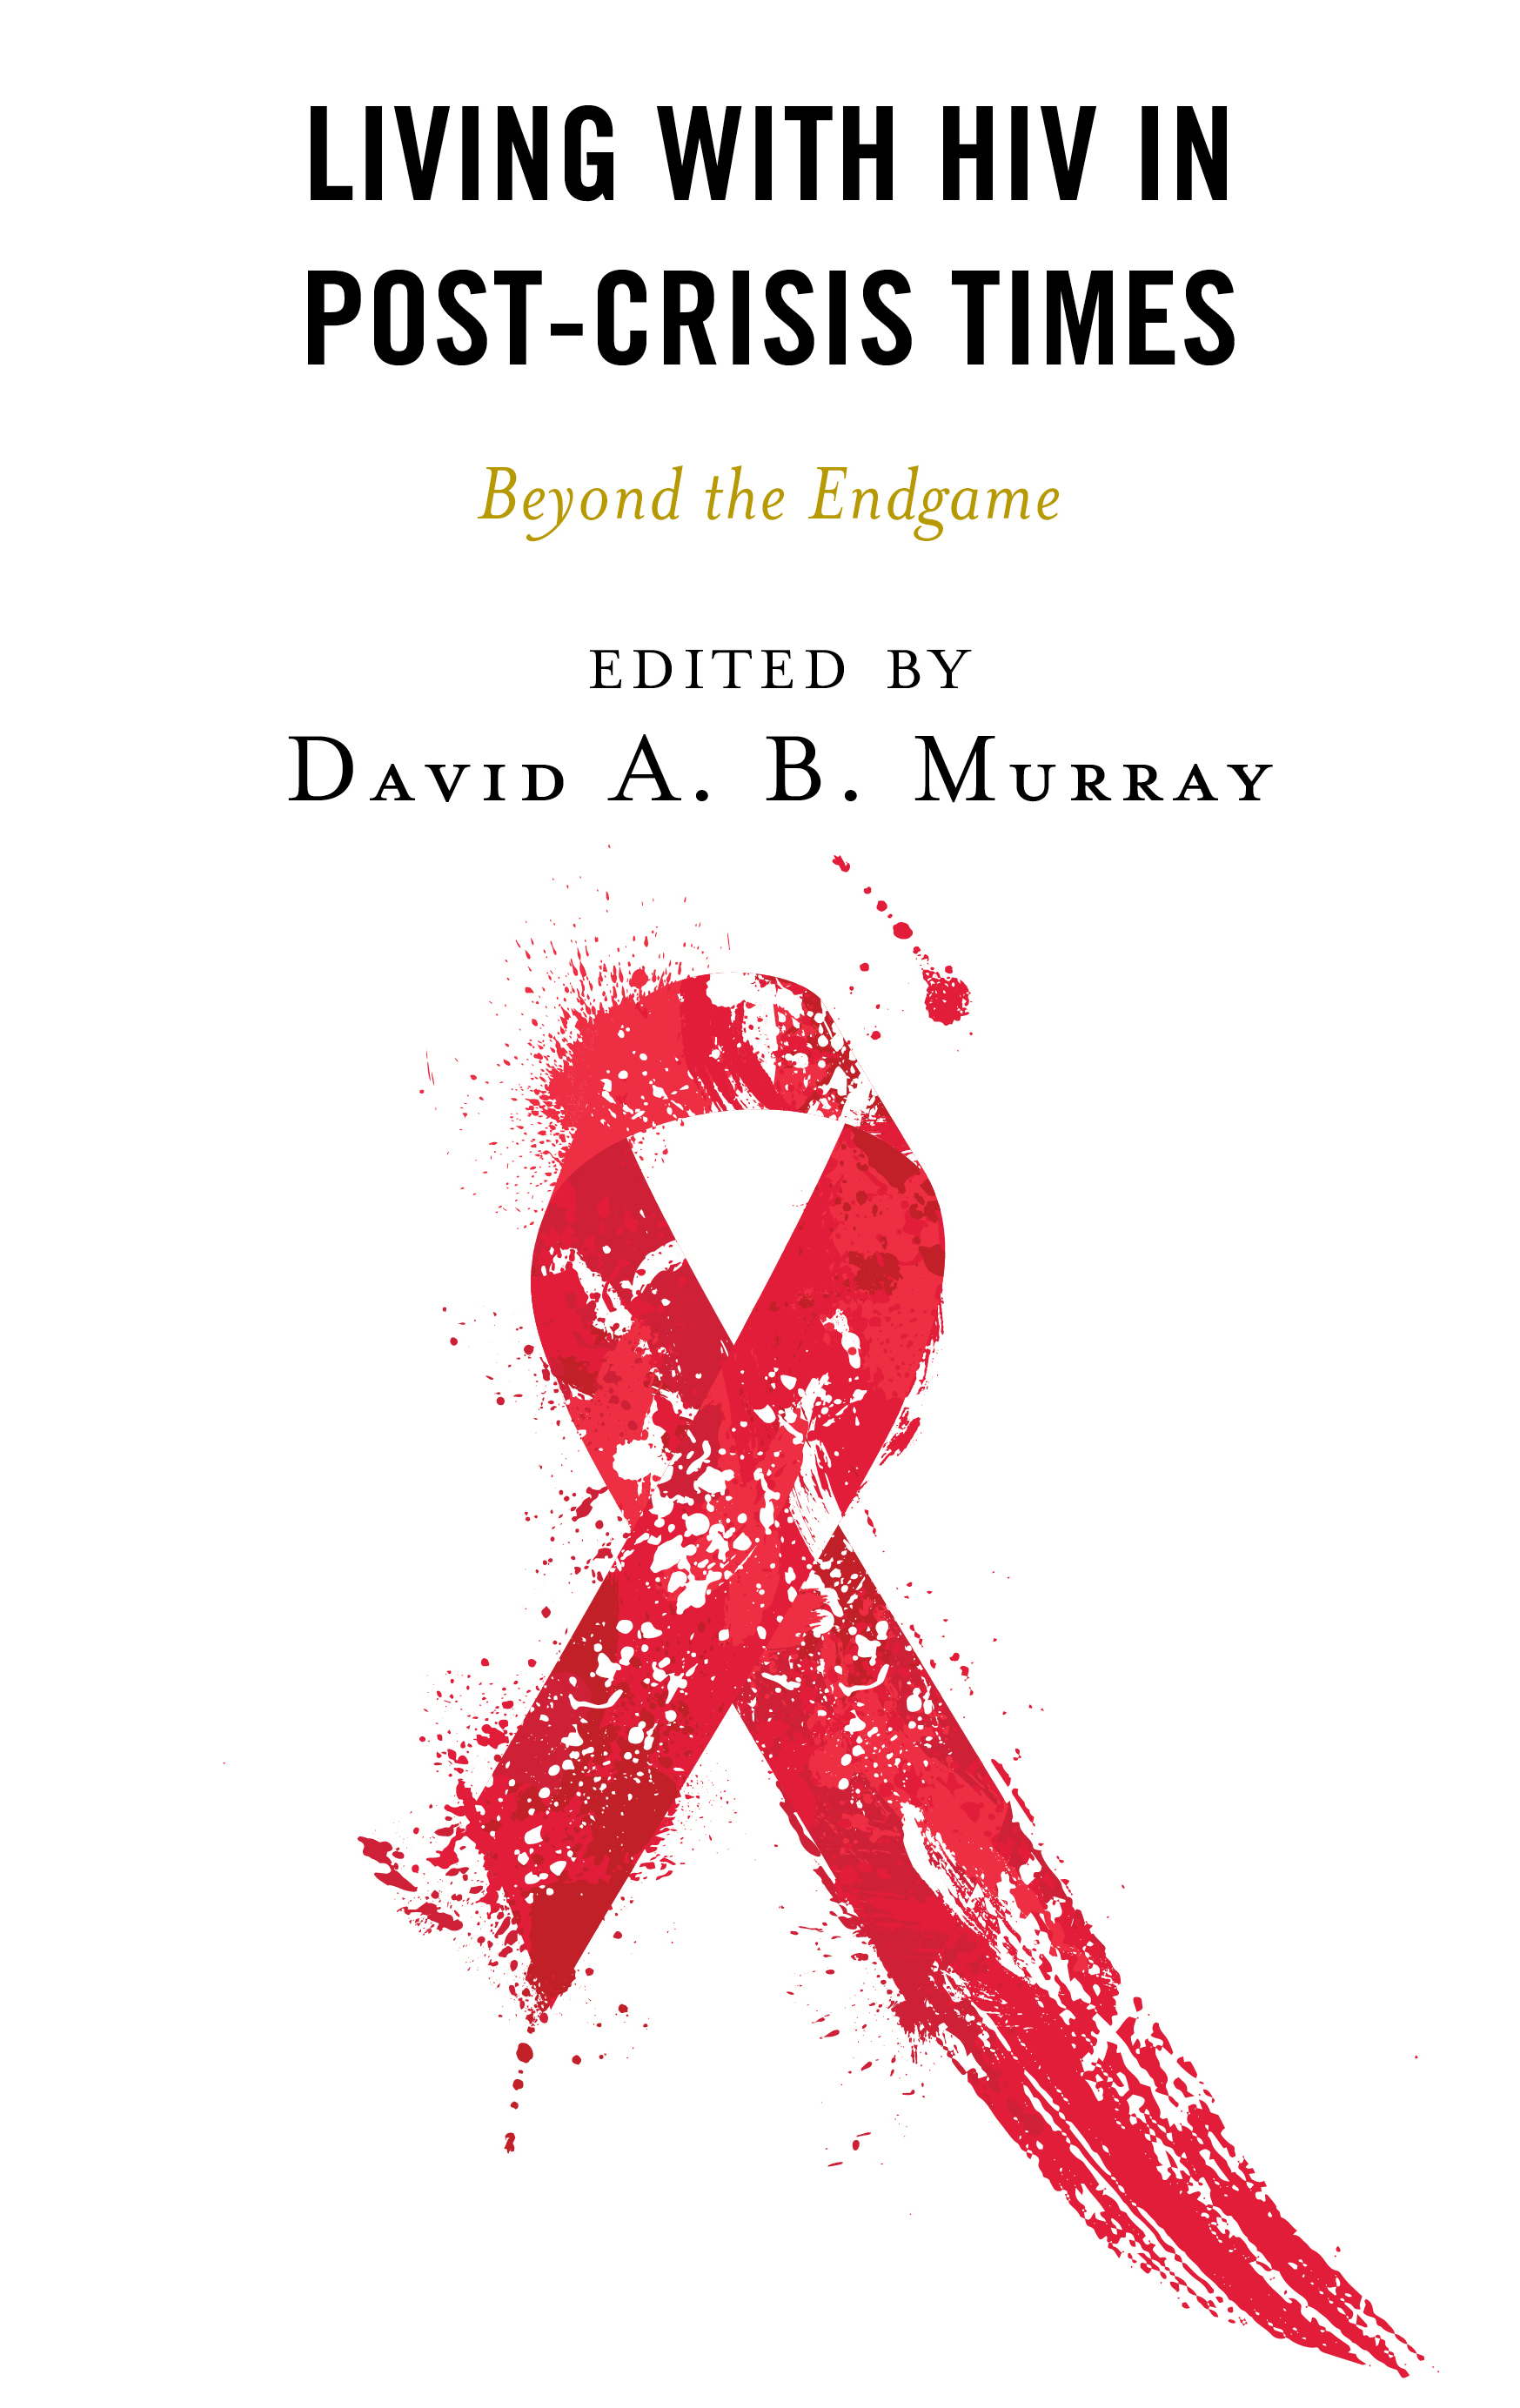 Living with HIV in Post-Crisis Times: Beyond the Endgame